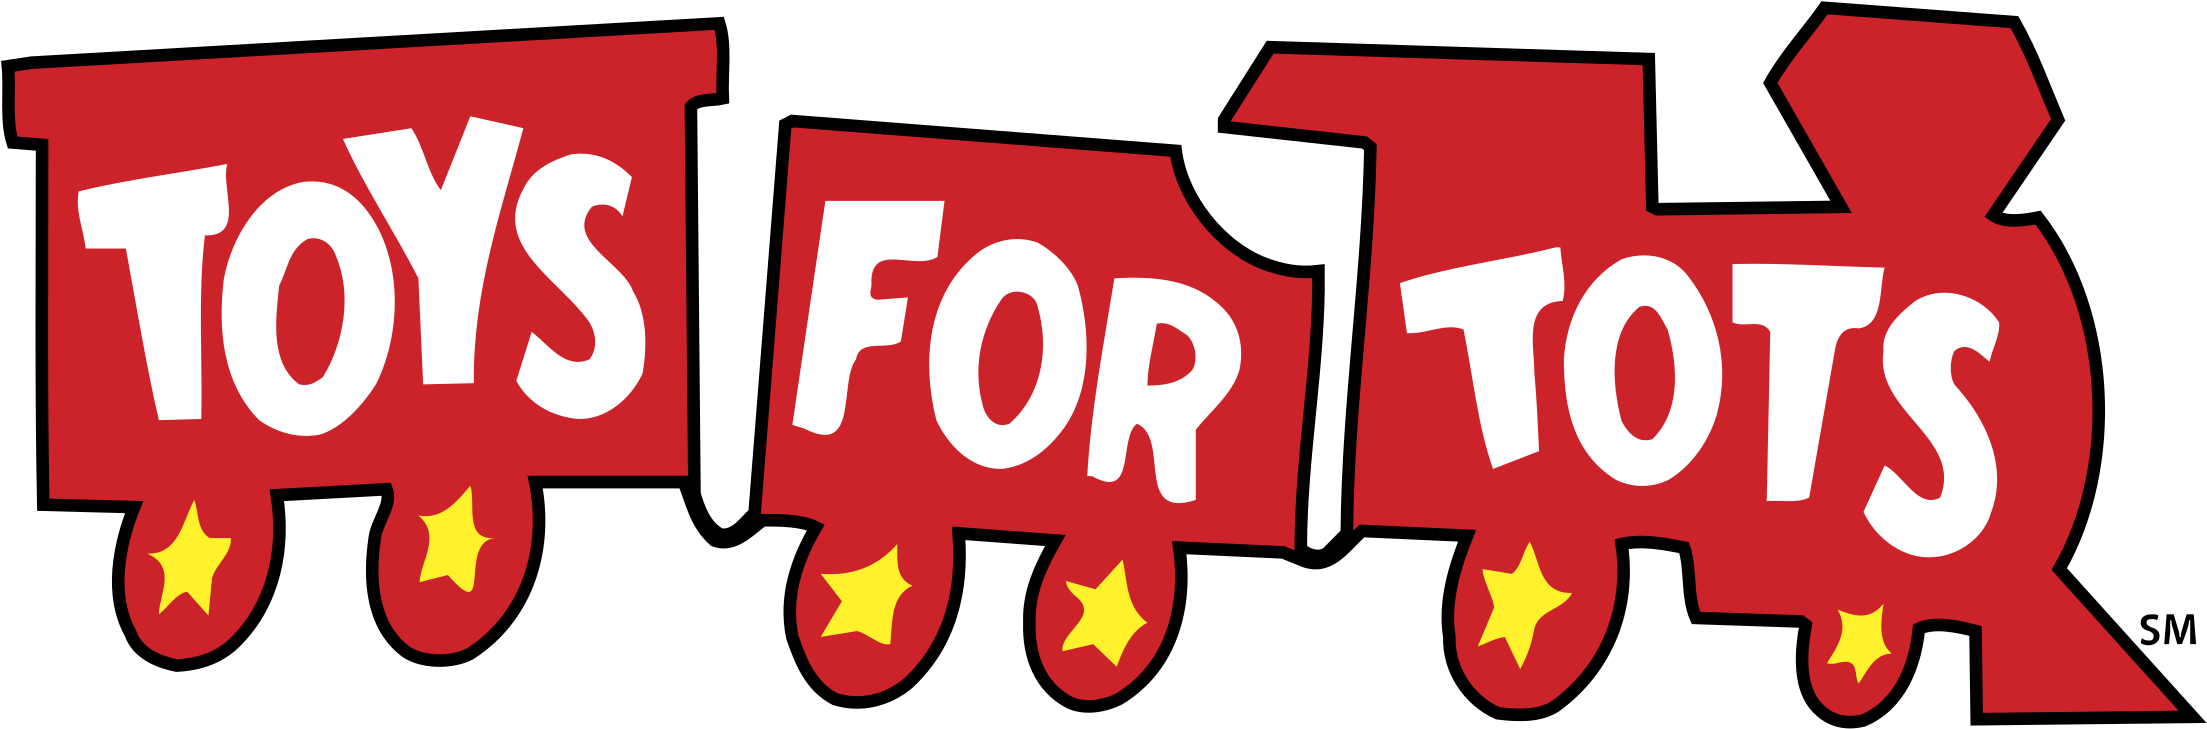 Toys For Tots Logo Png Transparent Toys For